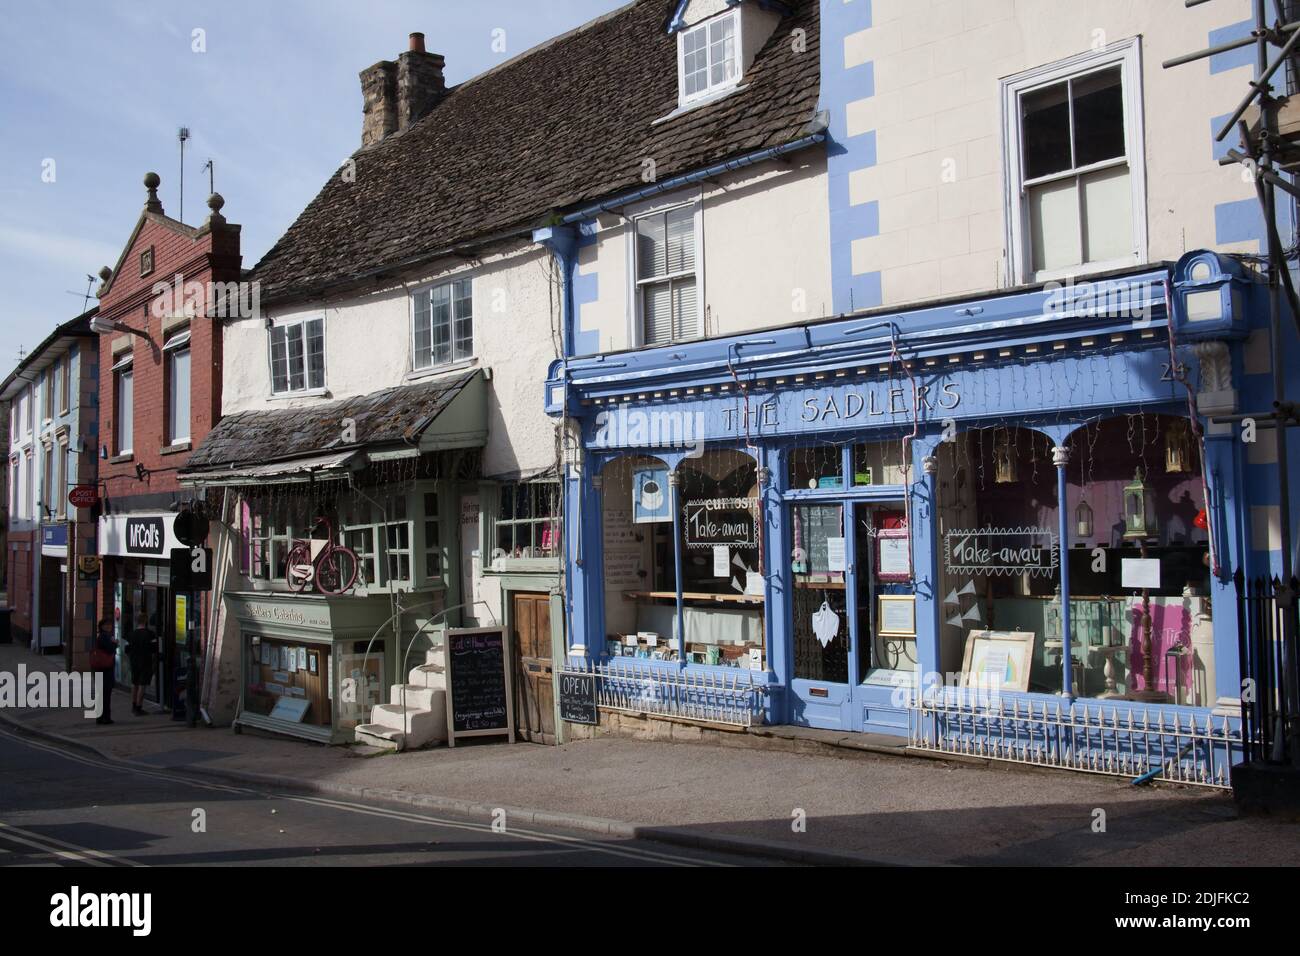 Shops on Market Place in Faringdon, Oxfordshire in the UK, taken 19th October 2020 Stock Photo